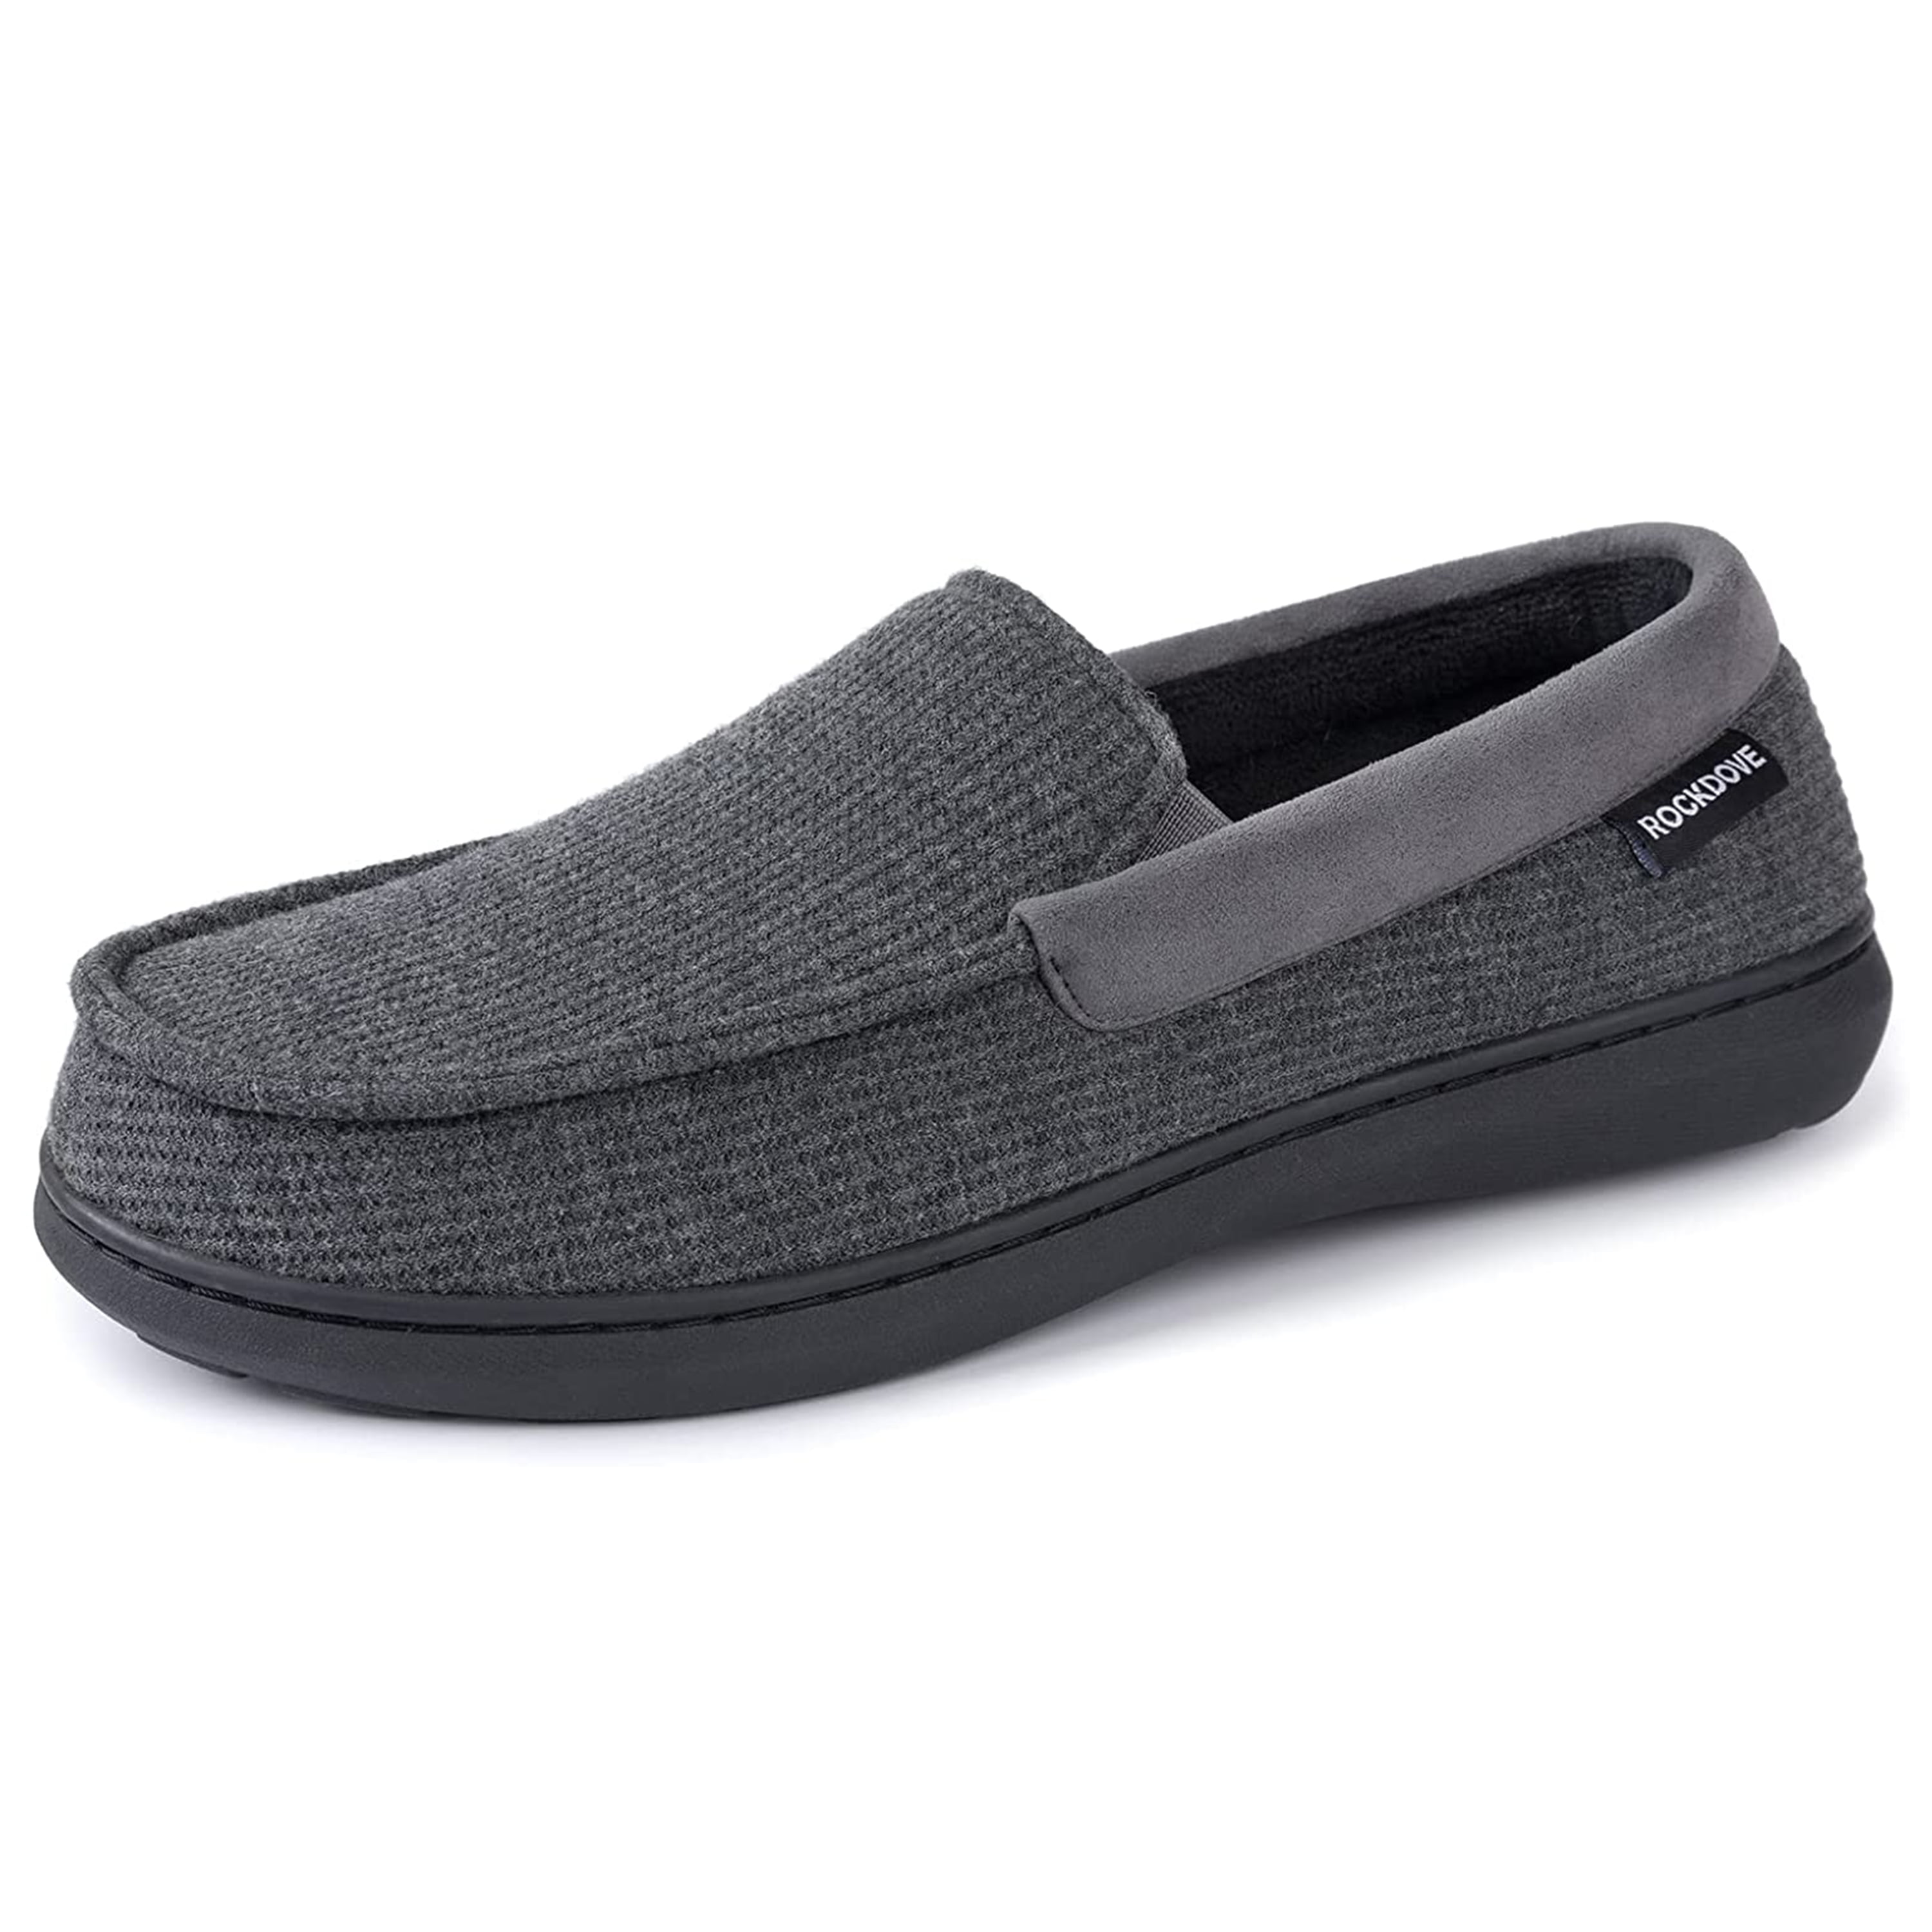 RockDove Men’s Removable Insole Slippers with SILVADUR Anti-Odor ...